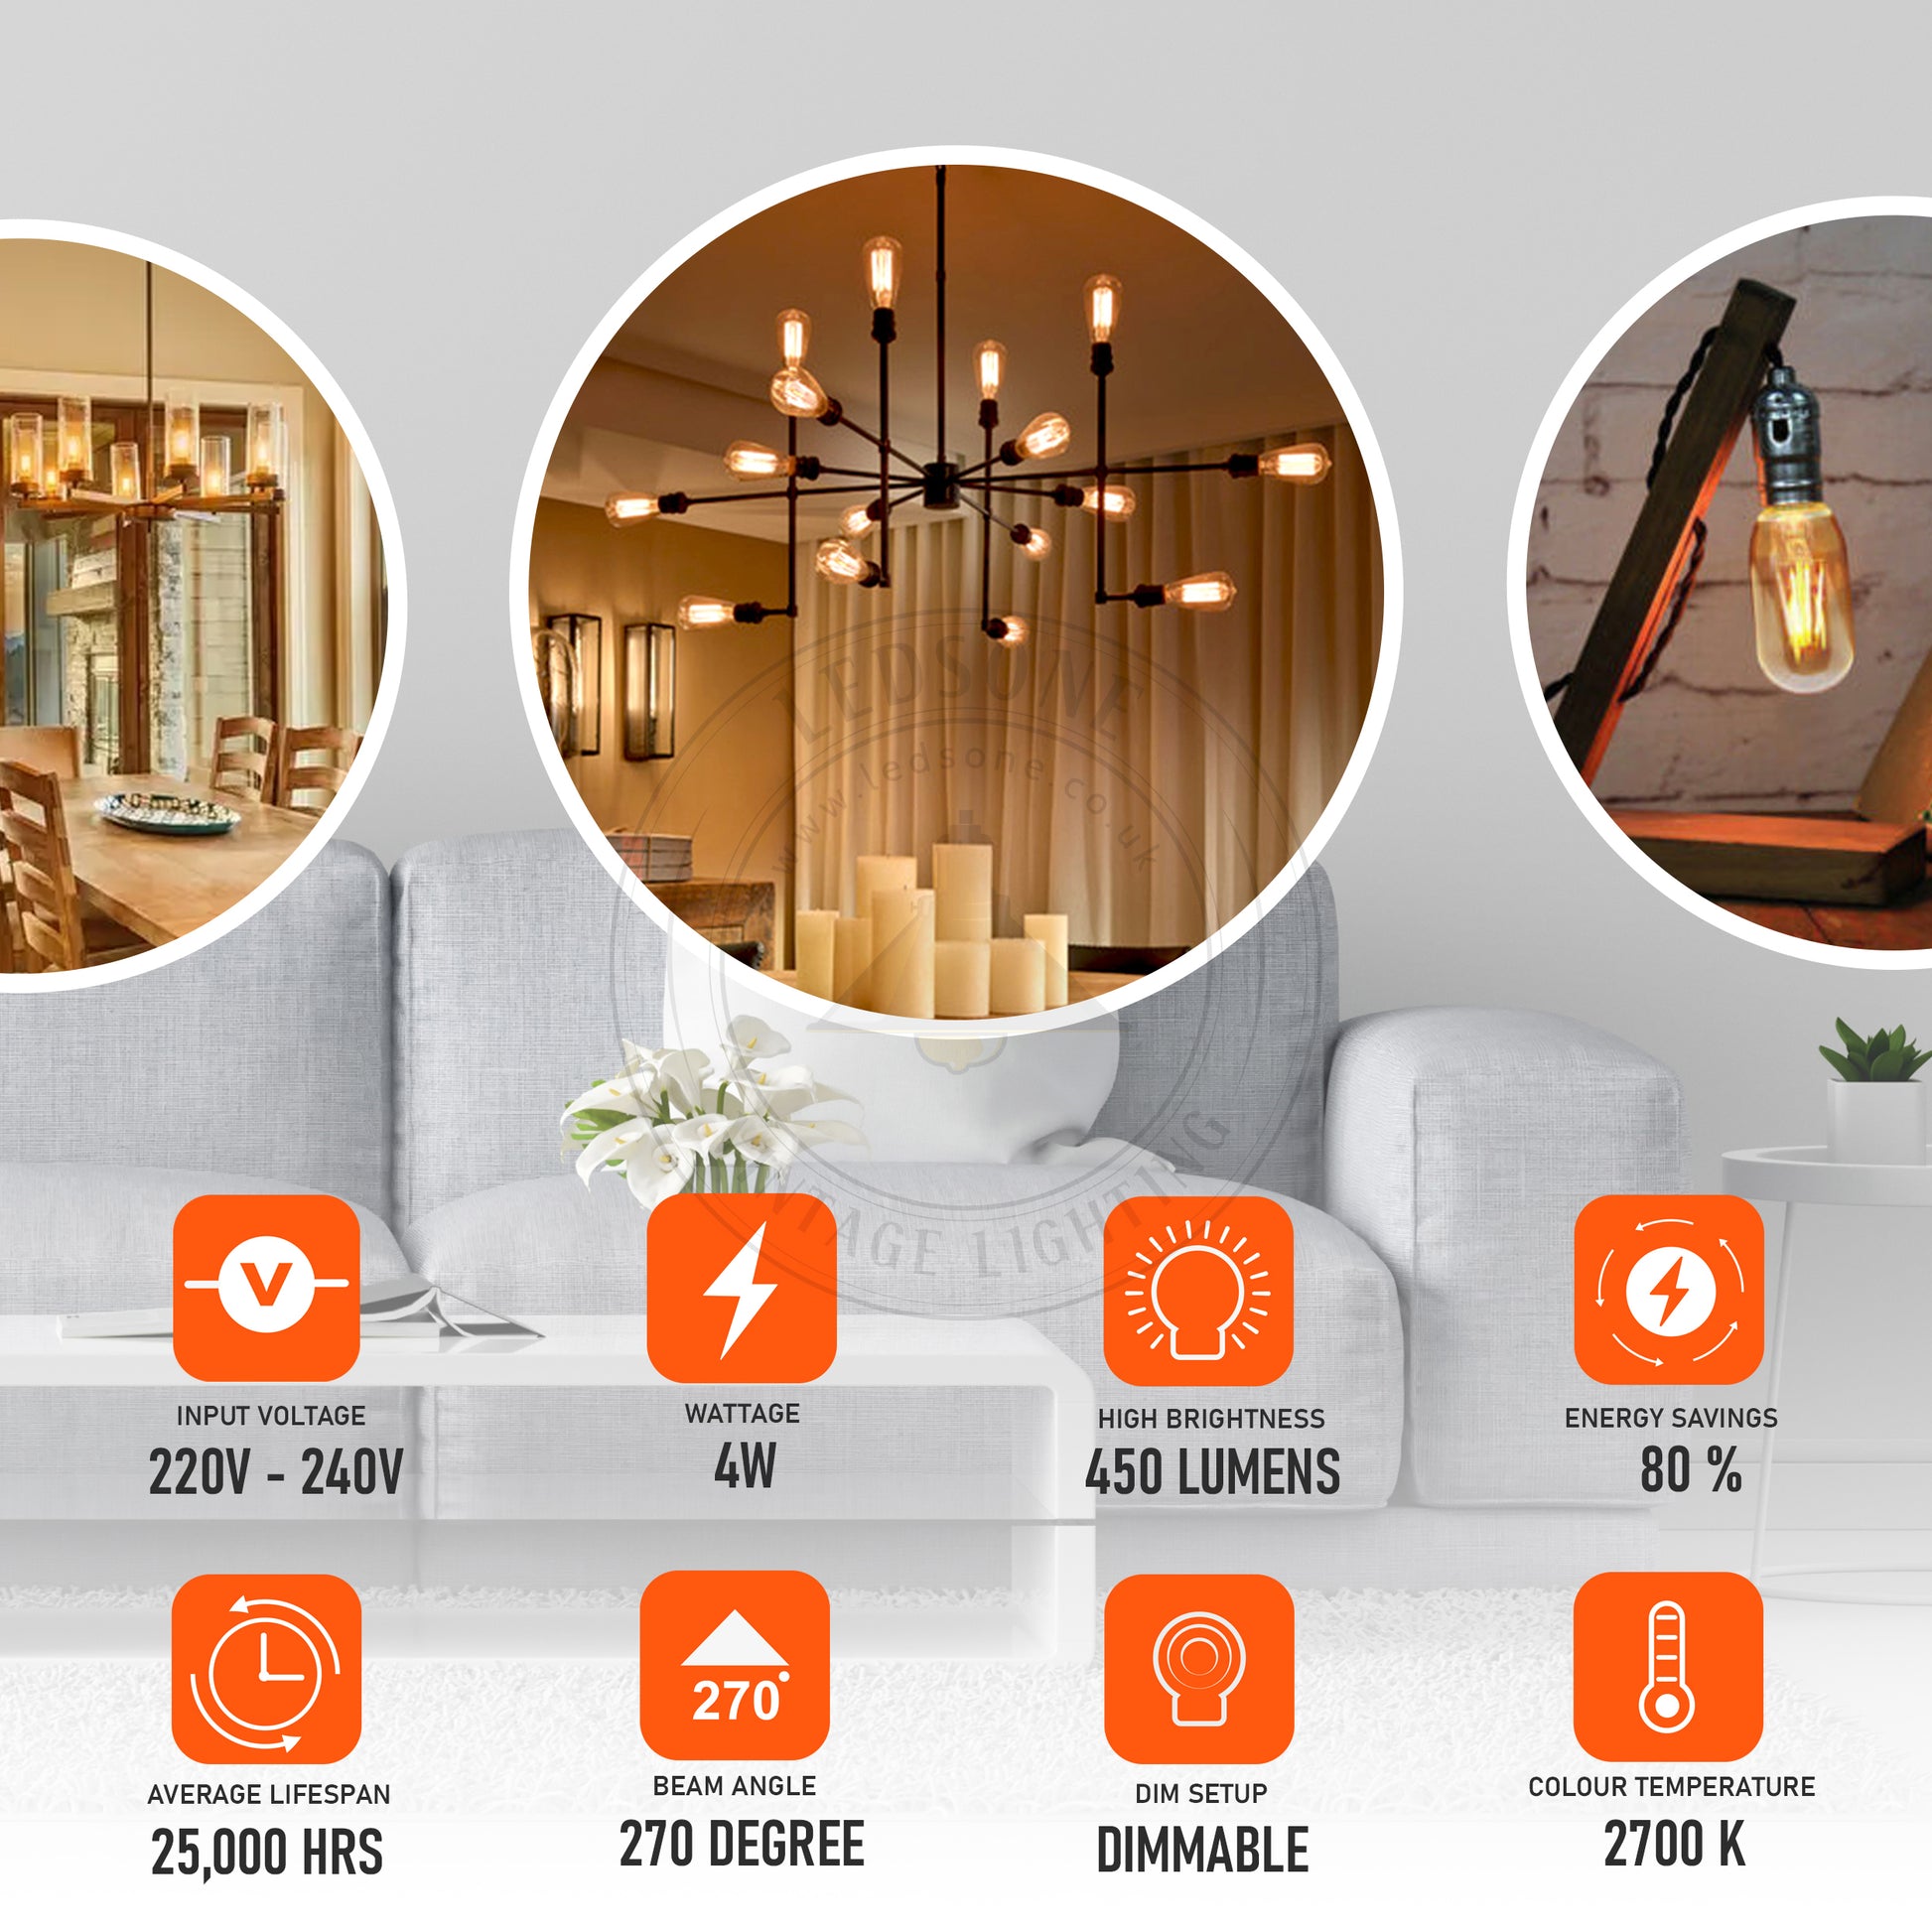 LED Dimmable light Bulb - Application image